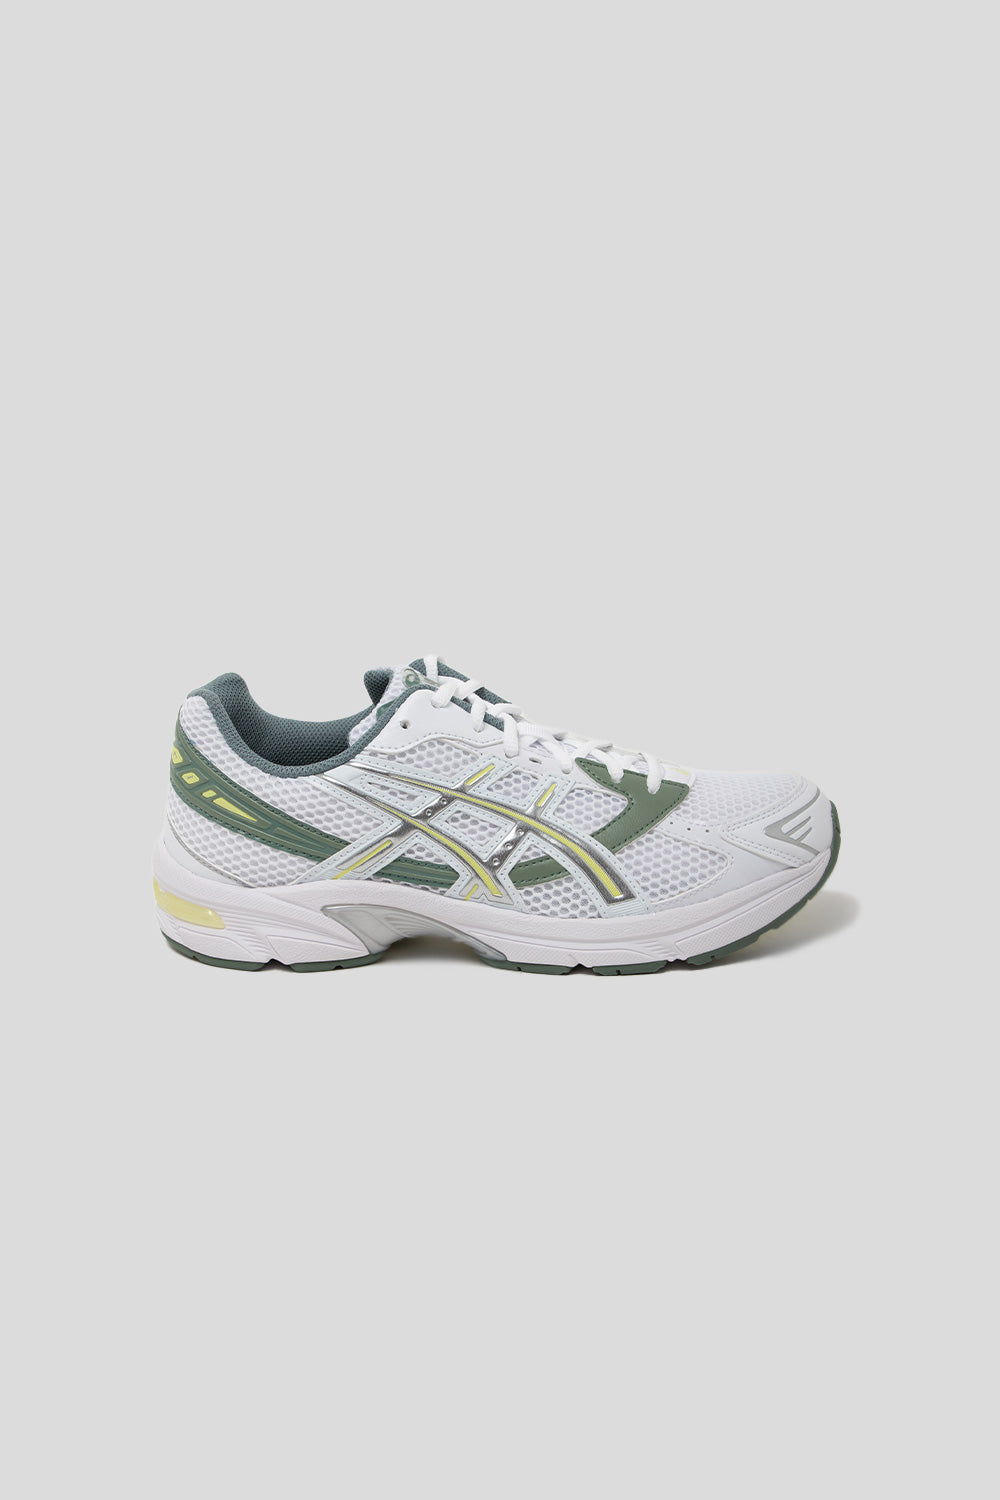 Asics Gel-1130 Shoe in White and Huddle Yellow